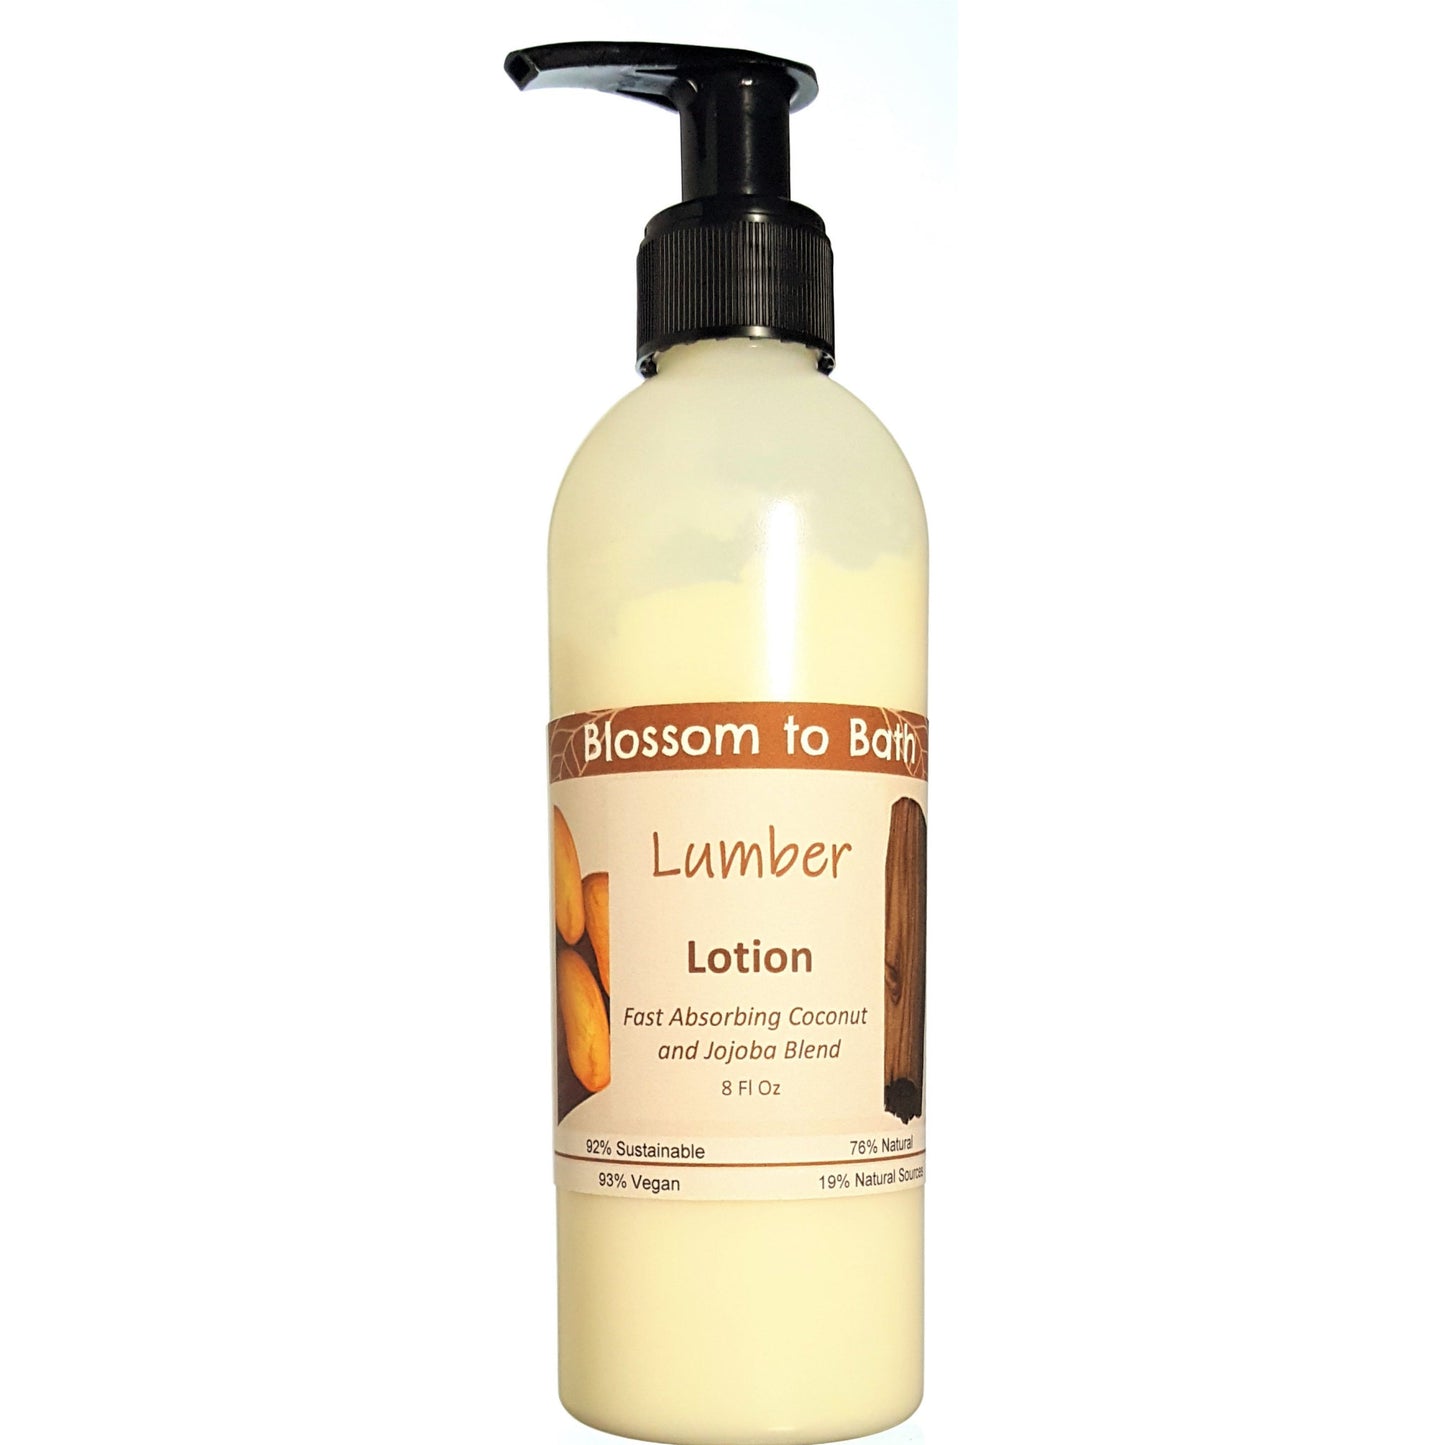 Buy Blossom to Bath Lumber Lotion from Flowersong Soap Studio.  Daily moisture  that soaks in quickly made with organic oils and butters that soften and smooth the skin  A masculine fragrance that echoes fresh cut trees.